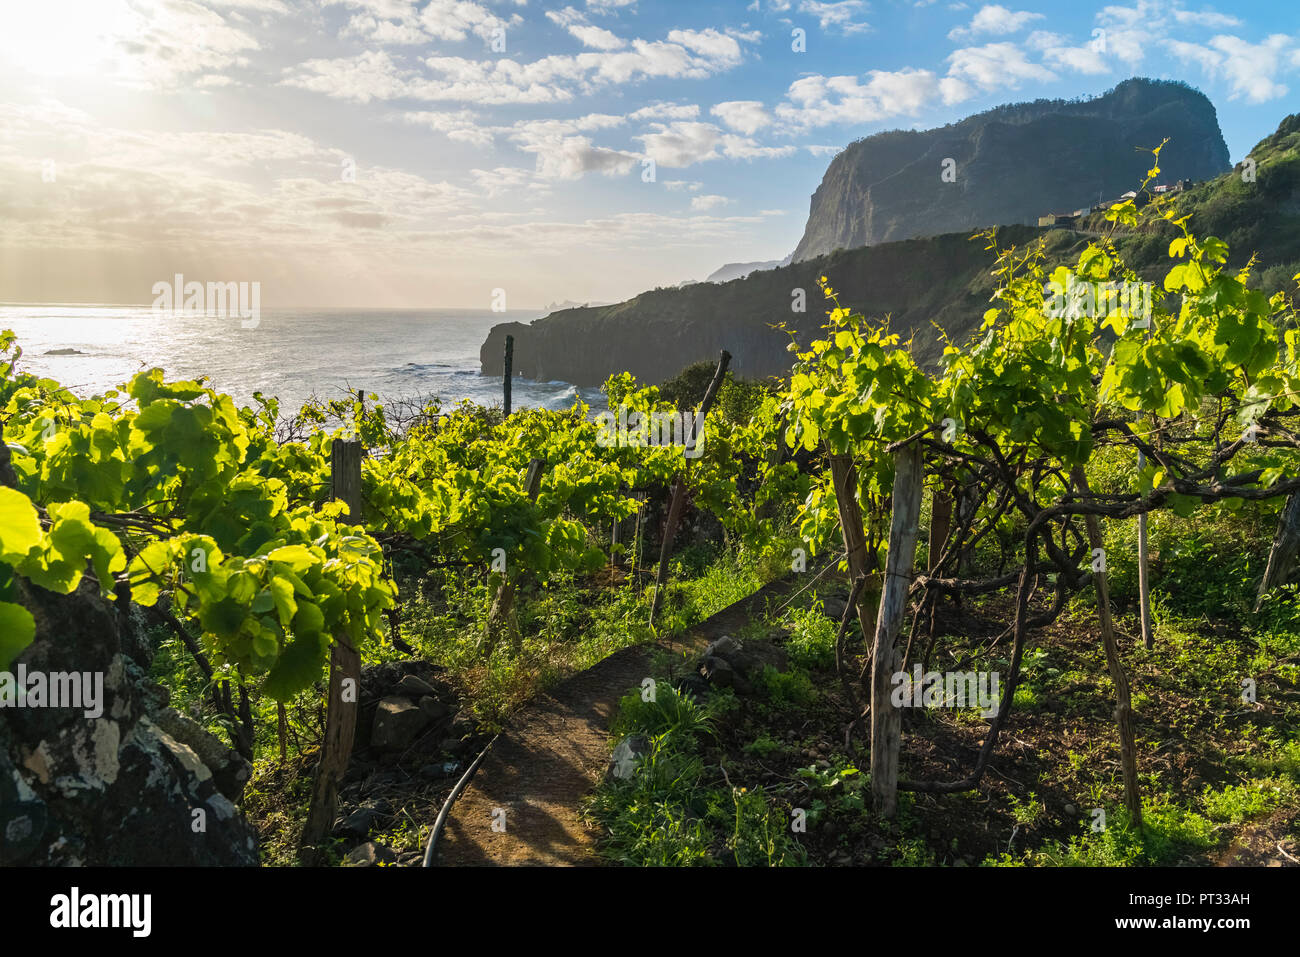 Vineyard with Crane viewpoint in the background, Faial, Santana municipality, Madeira region, Portugal, Stock Photo